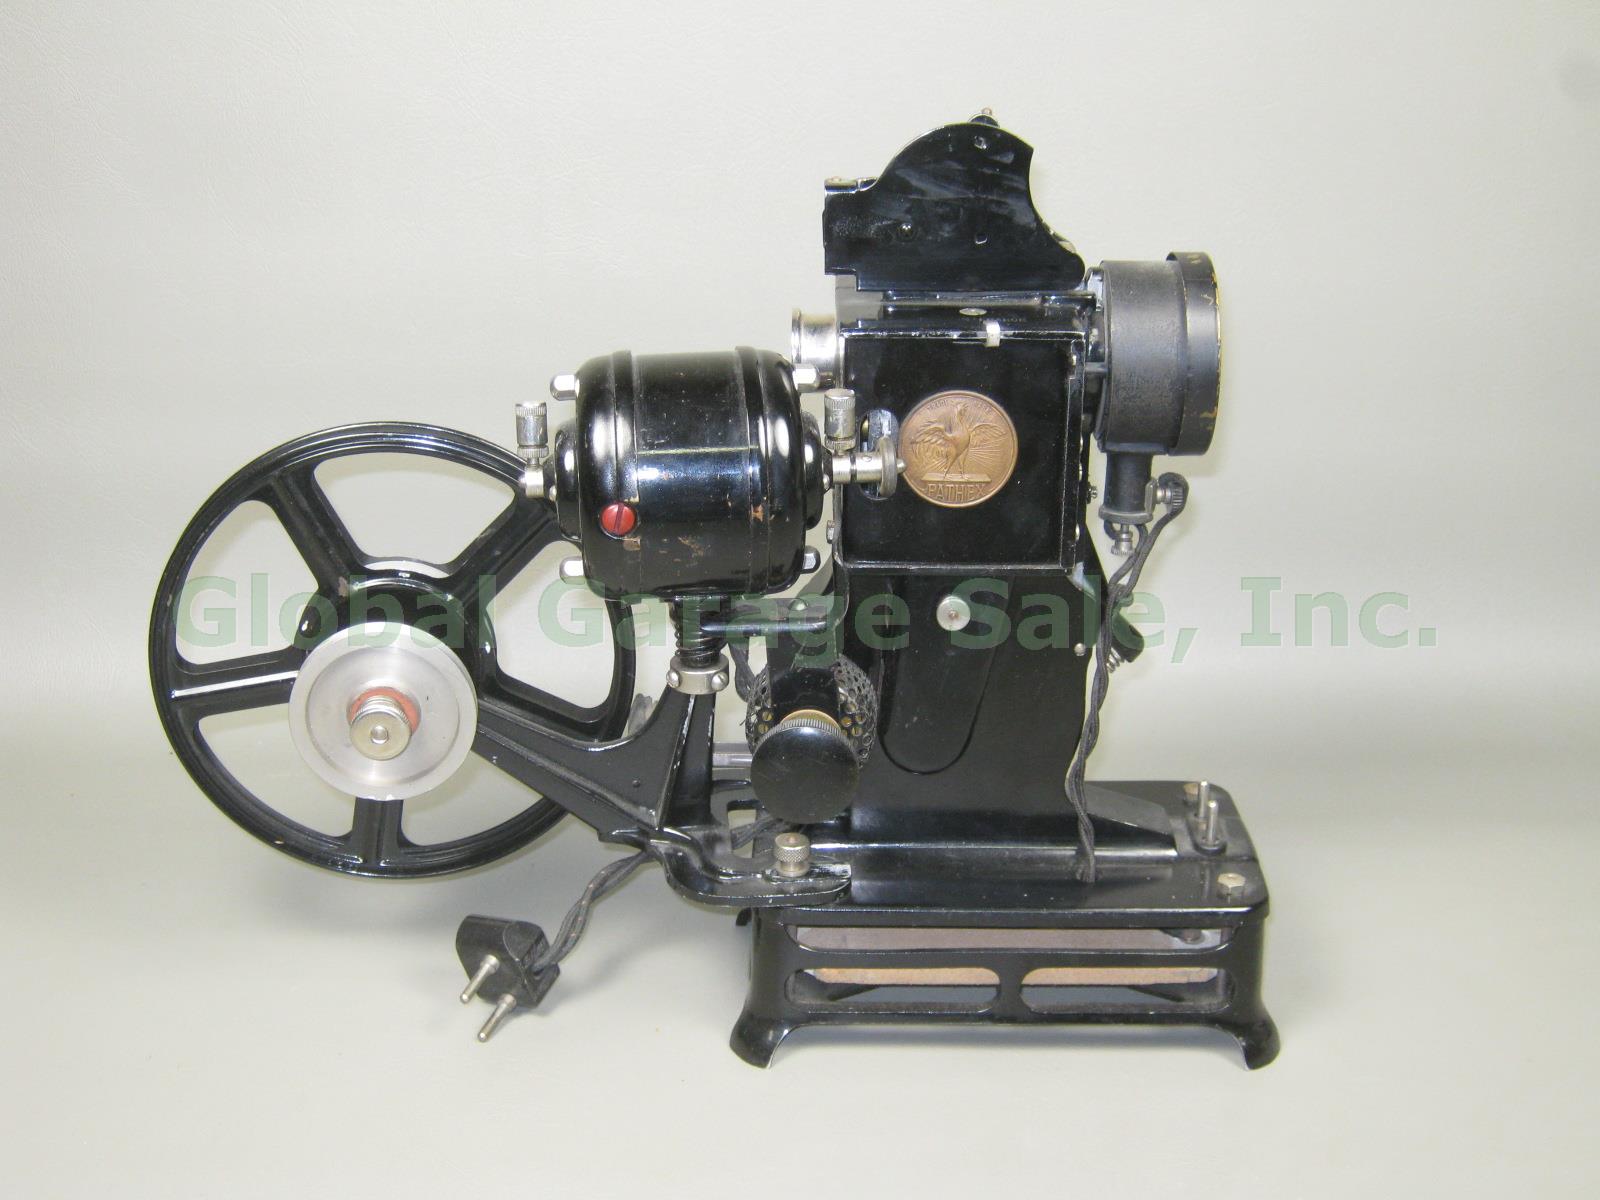 Antique Pathe Baby Pathex Pathescope 9.5mm Motion Picture Film Movie Projector